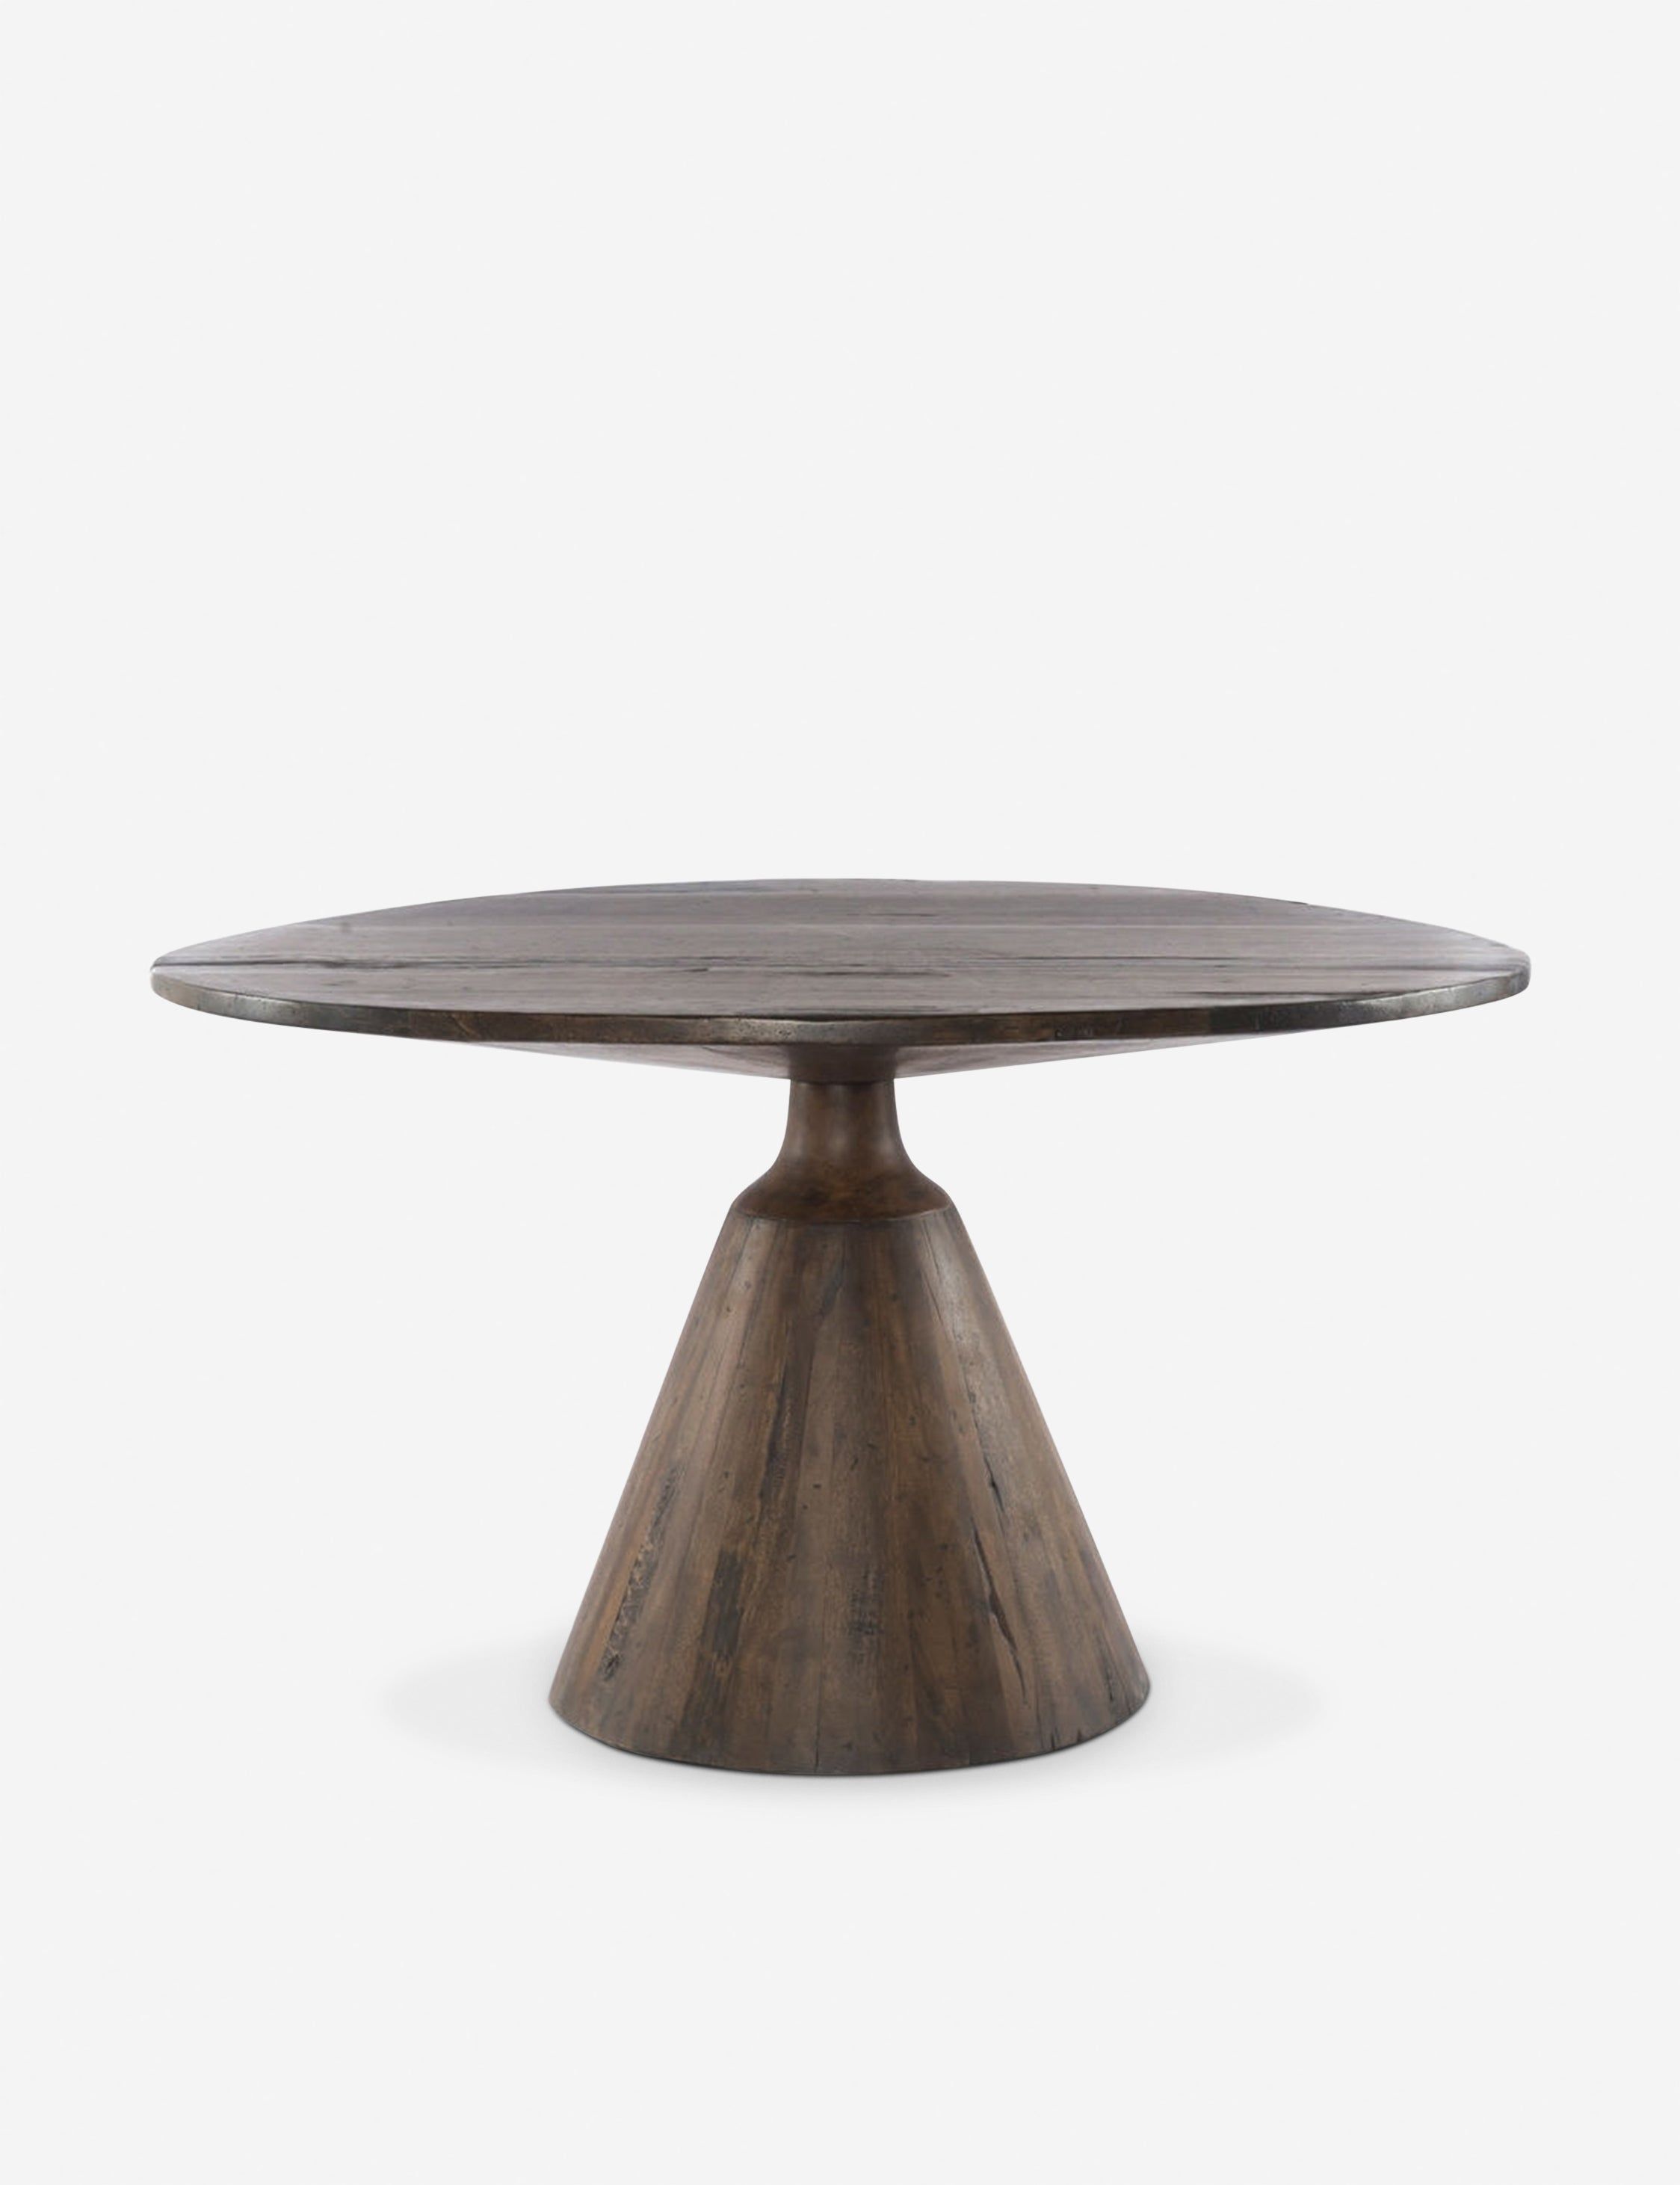 Reclaimed Wood & Marble Round Rustic Dining Table for Six